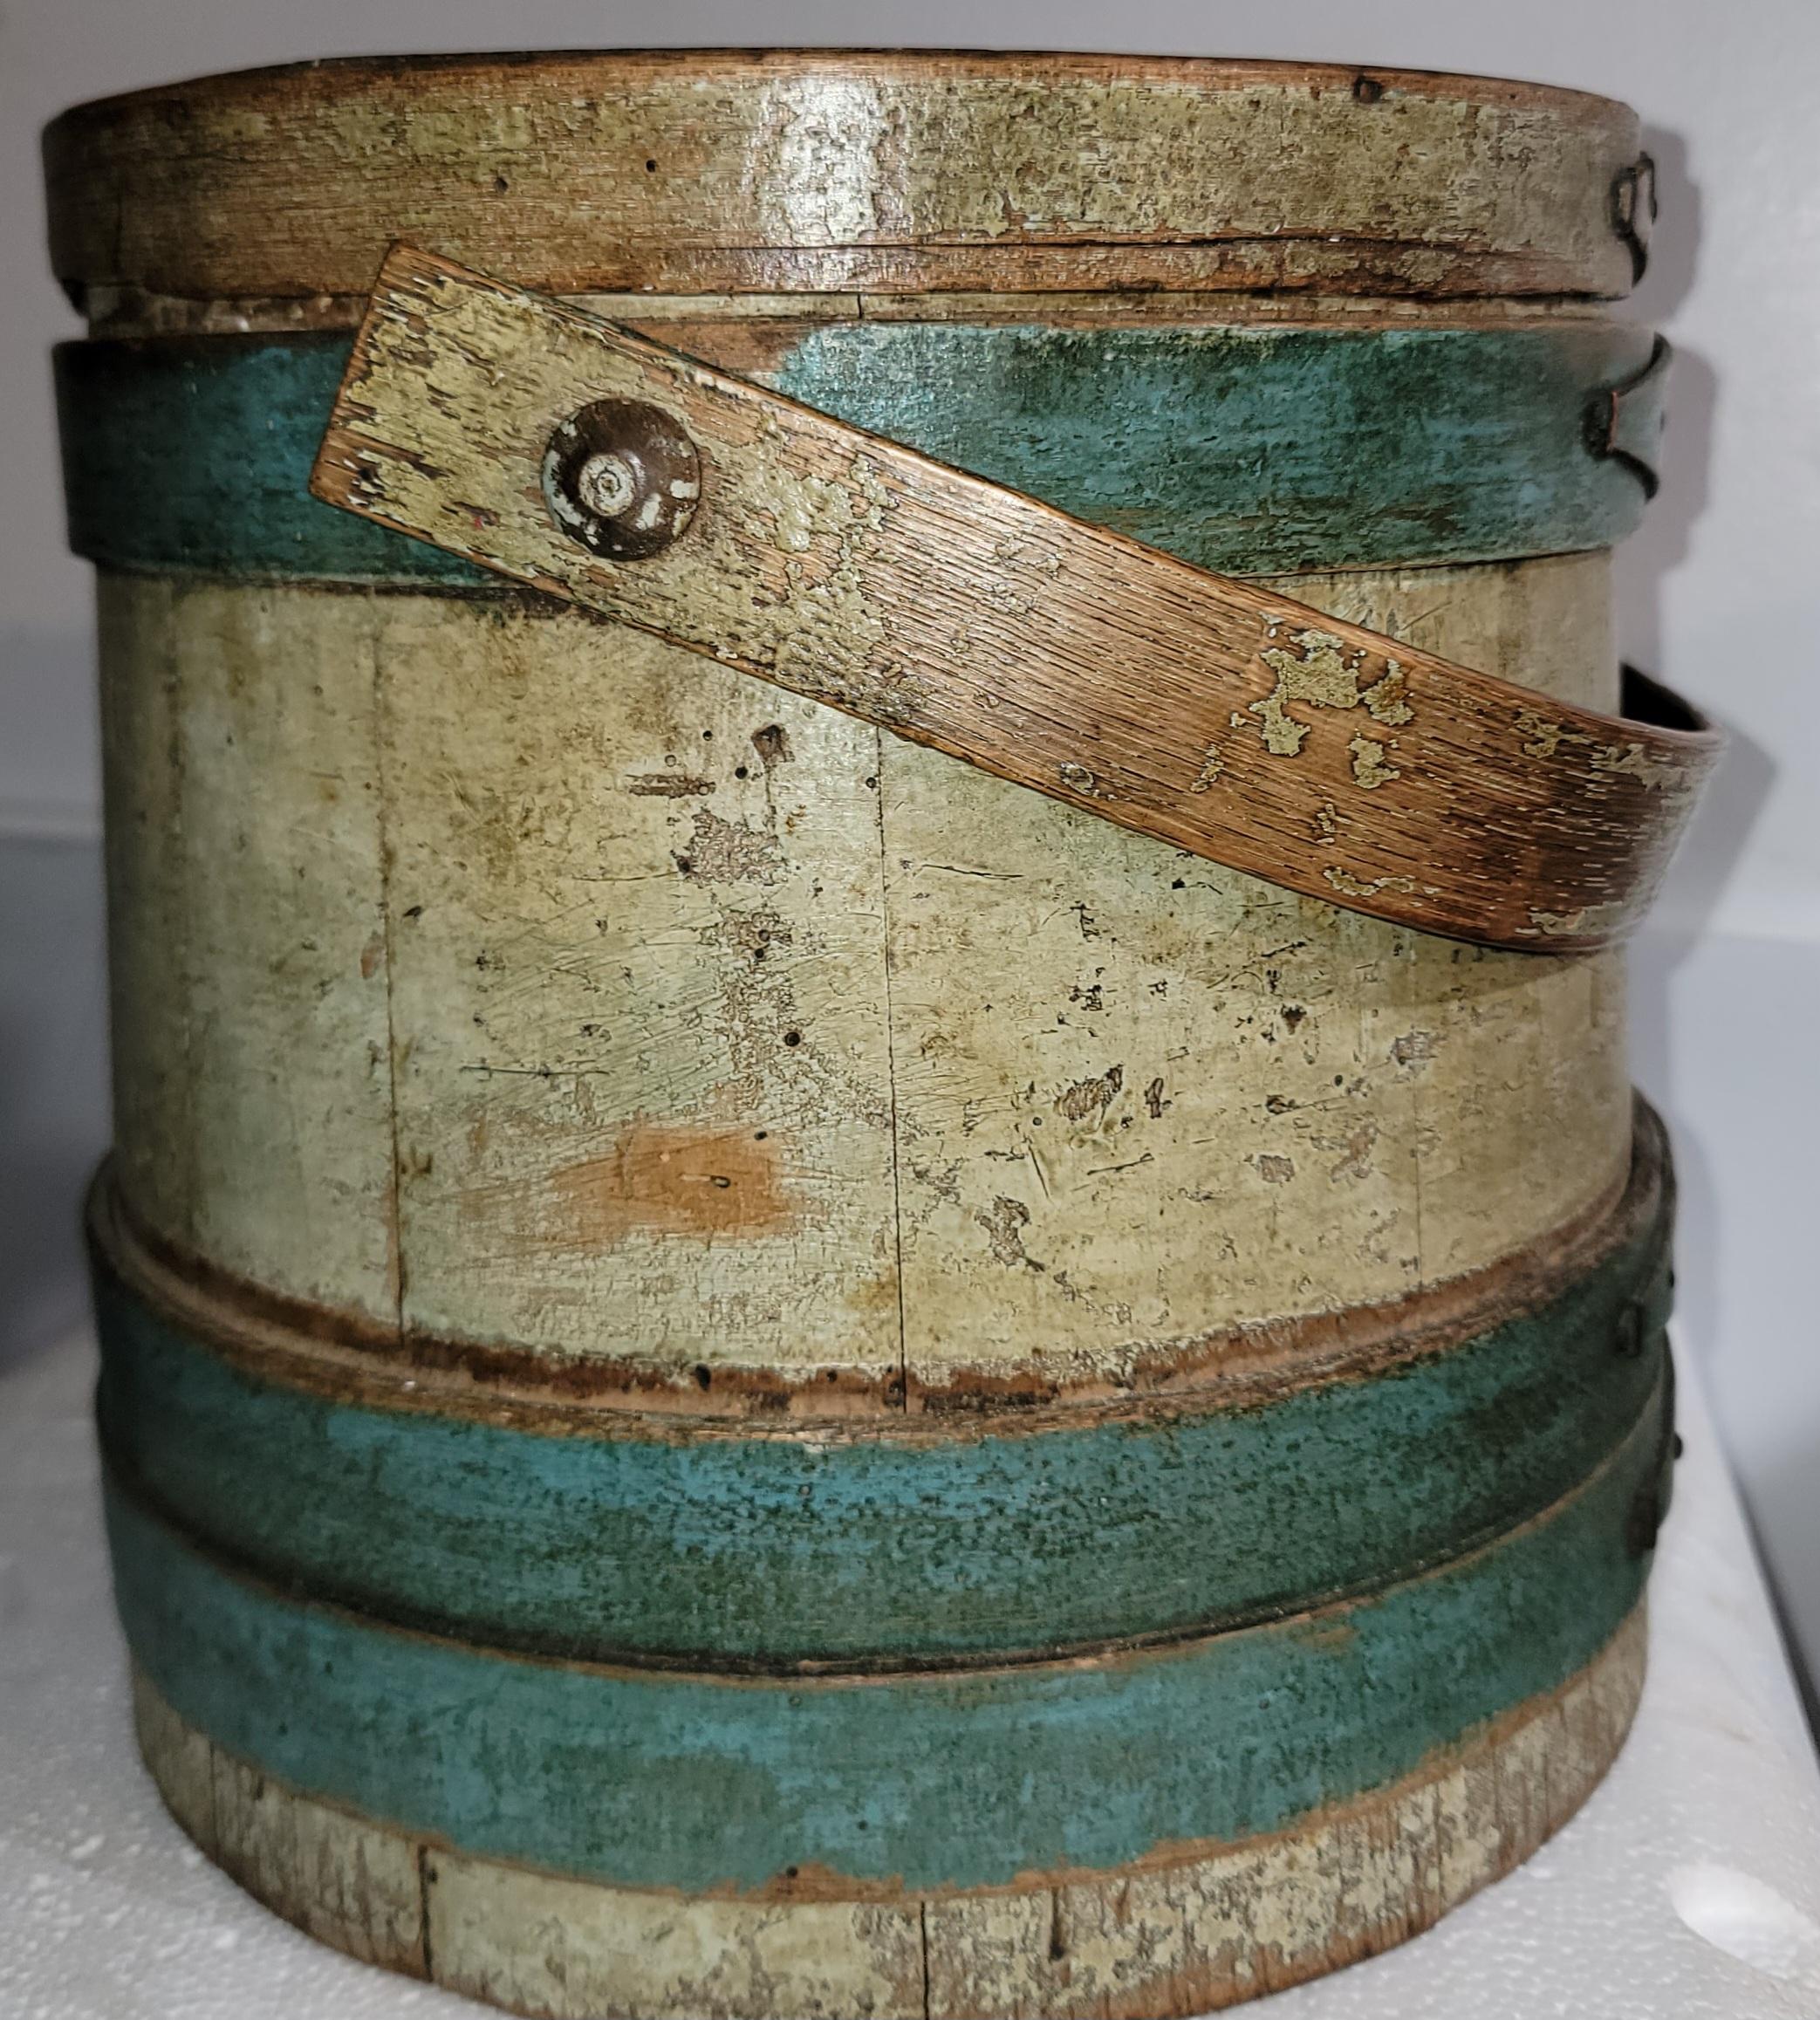 19thc Original painted striped blue & mustard painted furkin with the original painted lid.The condition is very good. This New England bucket has all original lid and copper nail construction.